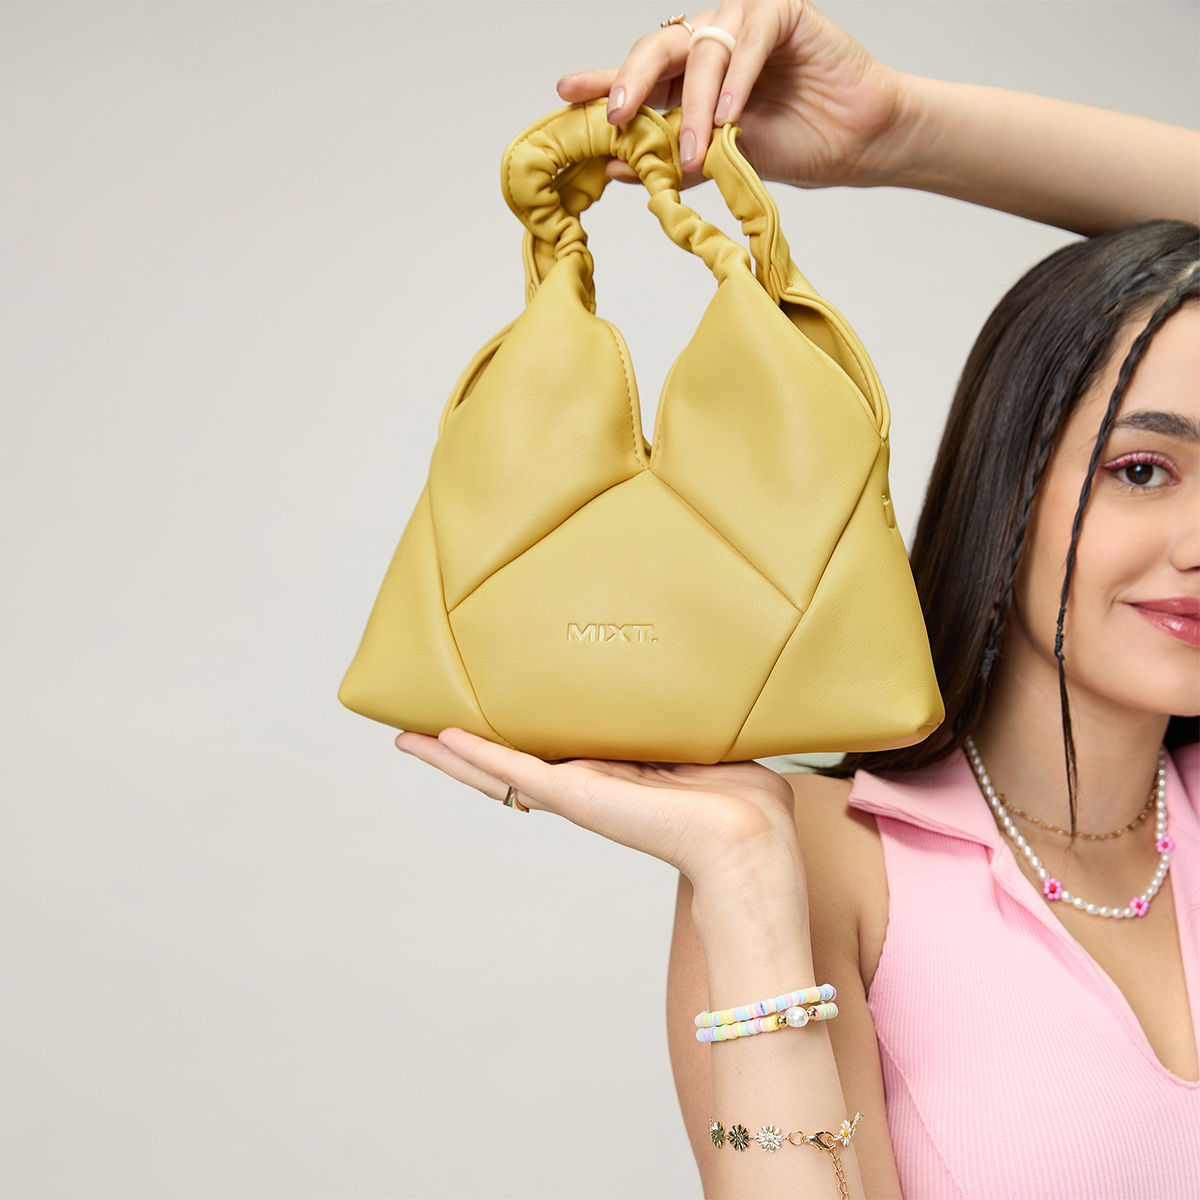 13 Best Yellow bag ideas in 2023 | yellow bag, fashion, street style